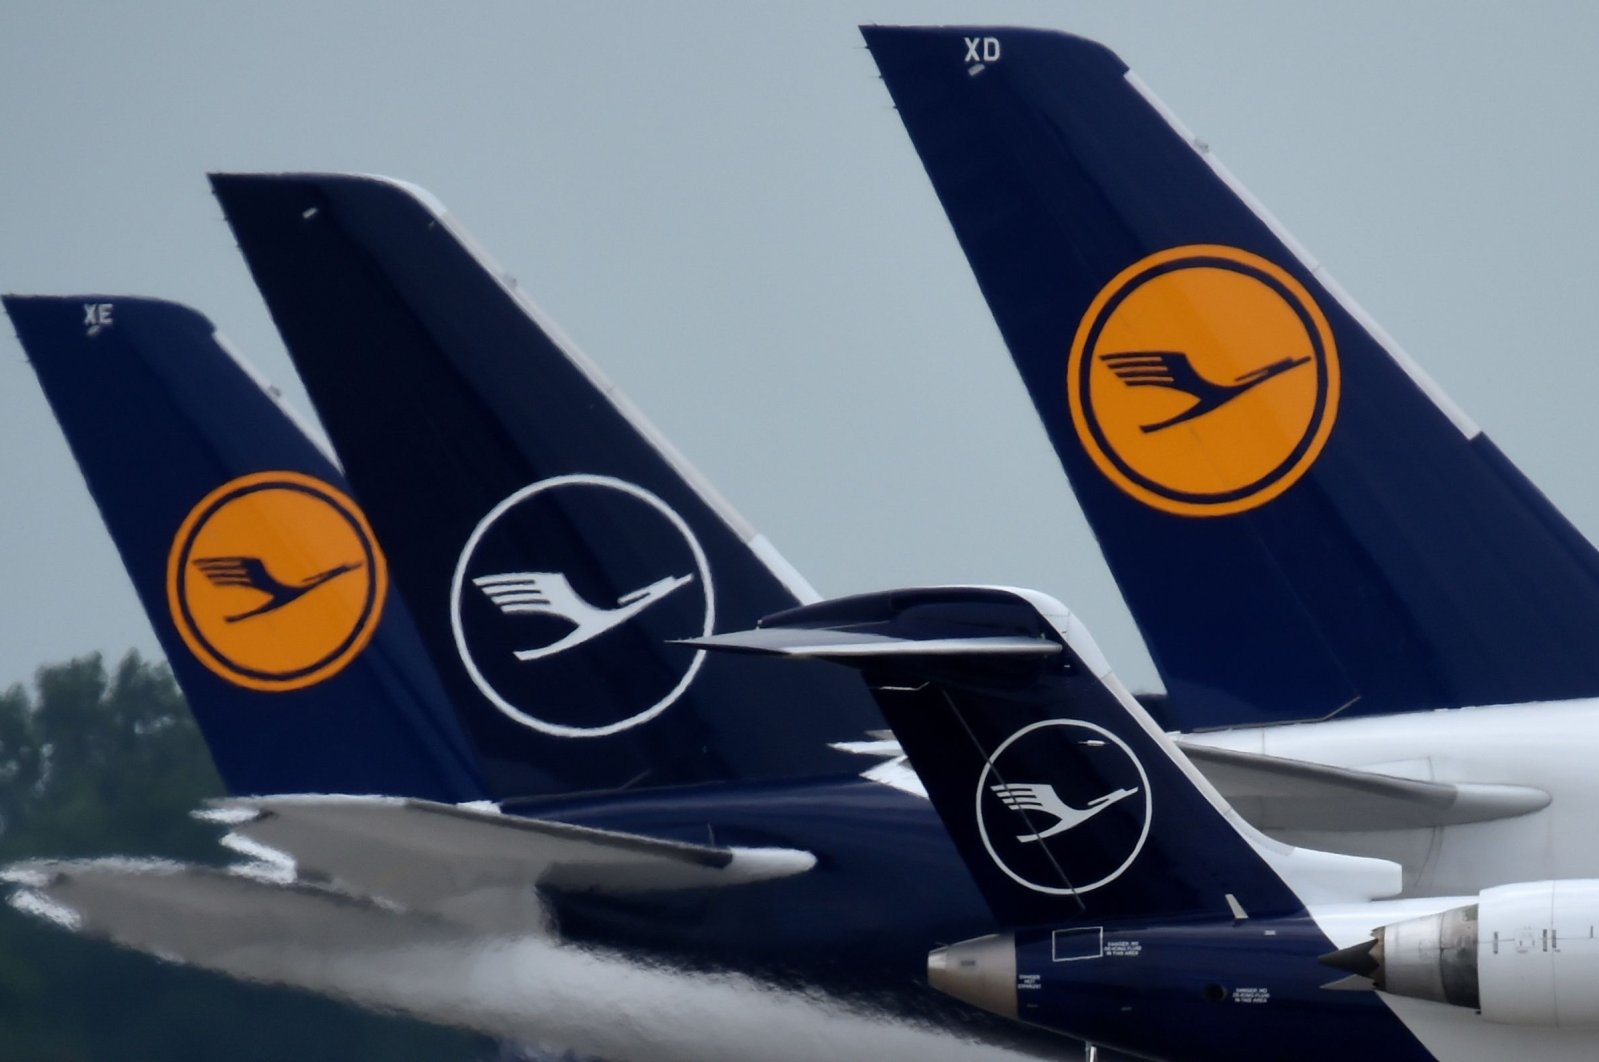  This file photo taken on June 25, 2020 shows aircrafts of German airline Lufthansa at "Franz-Josef-Strauss" airport in Munich, southern Germany. (AFP Photo)